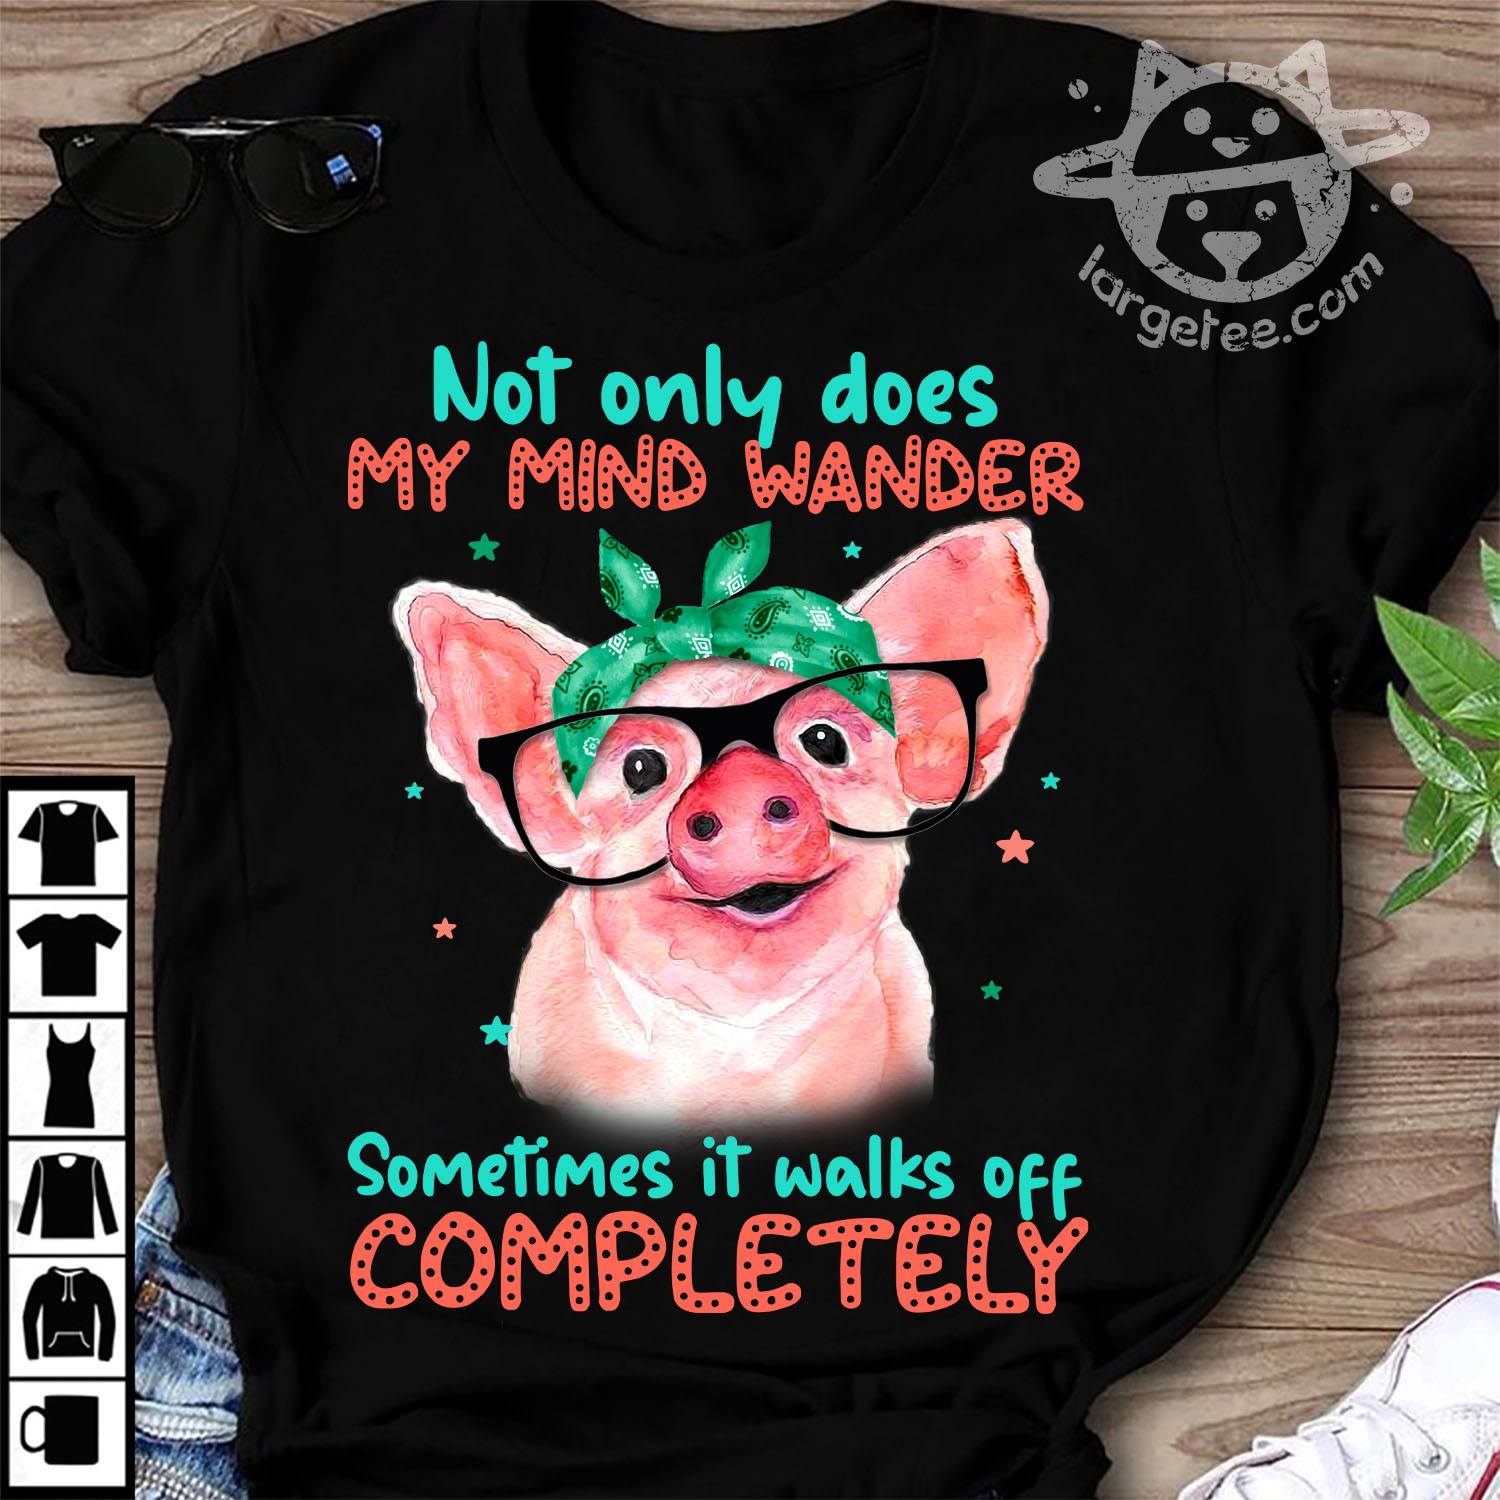 Not only does my mind wander - Grumpy pig